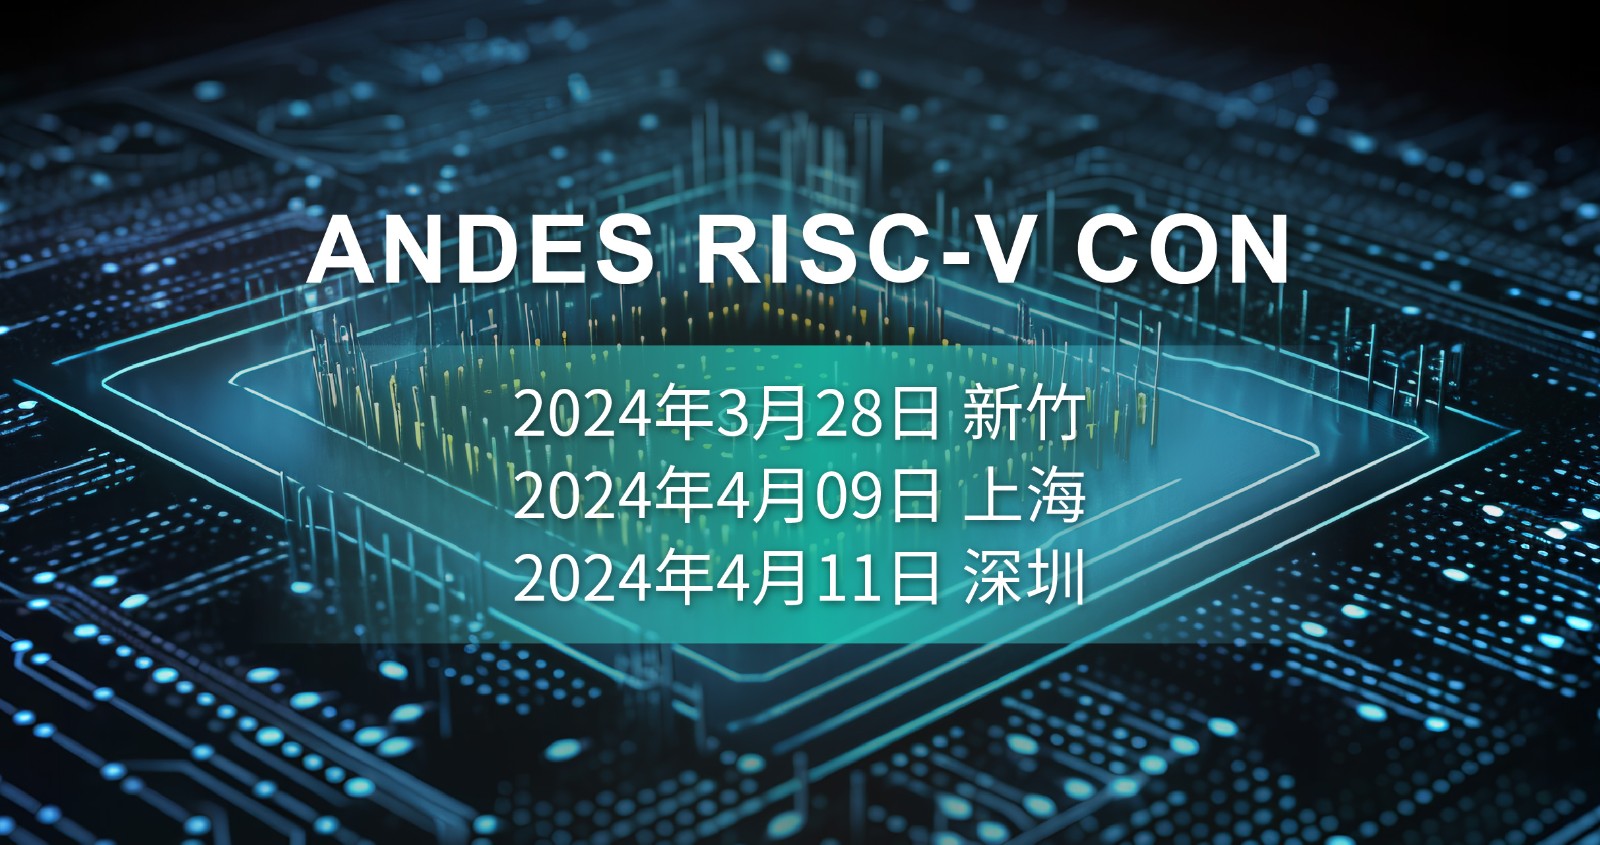 ANDES RISC-V CON.jpg